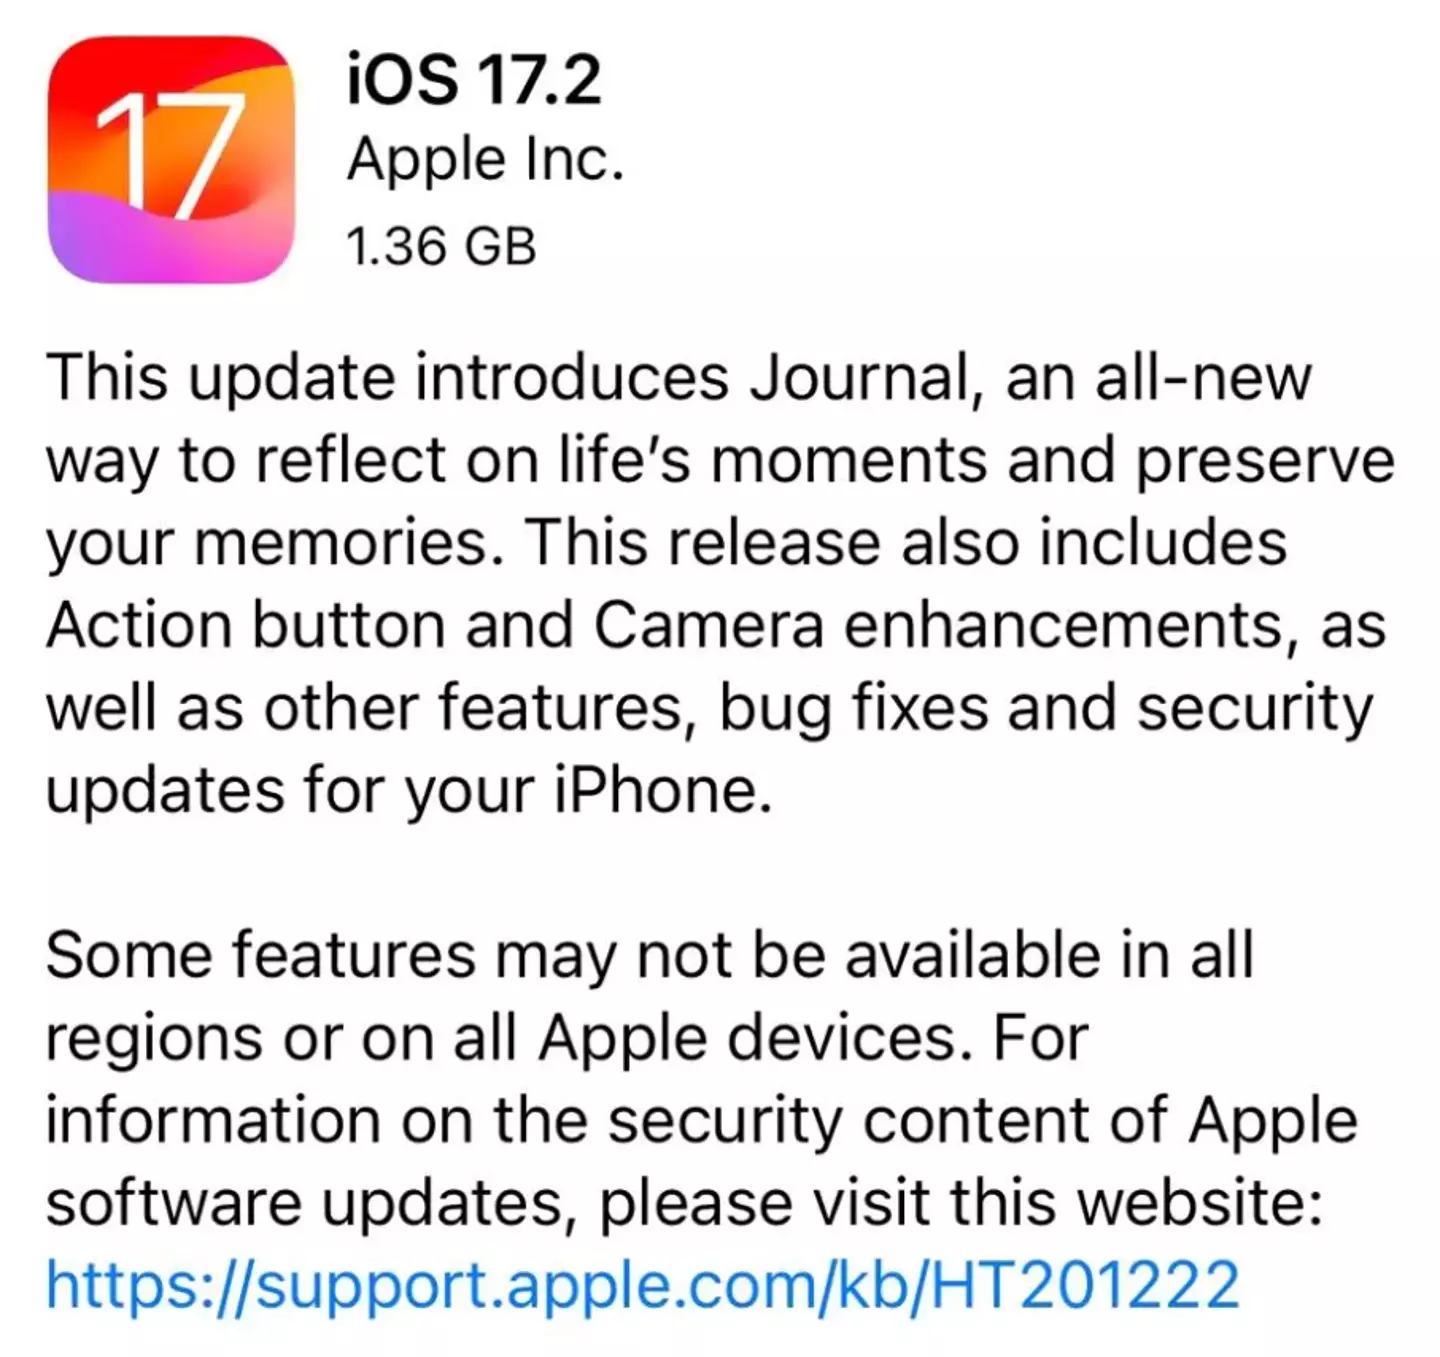 iPhone owners are encouraged to iOS 17.2.